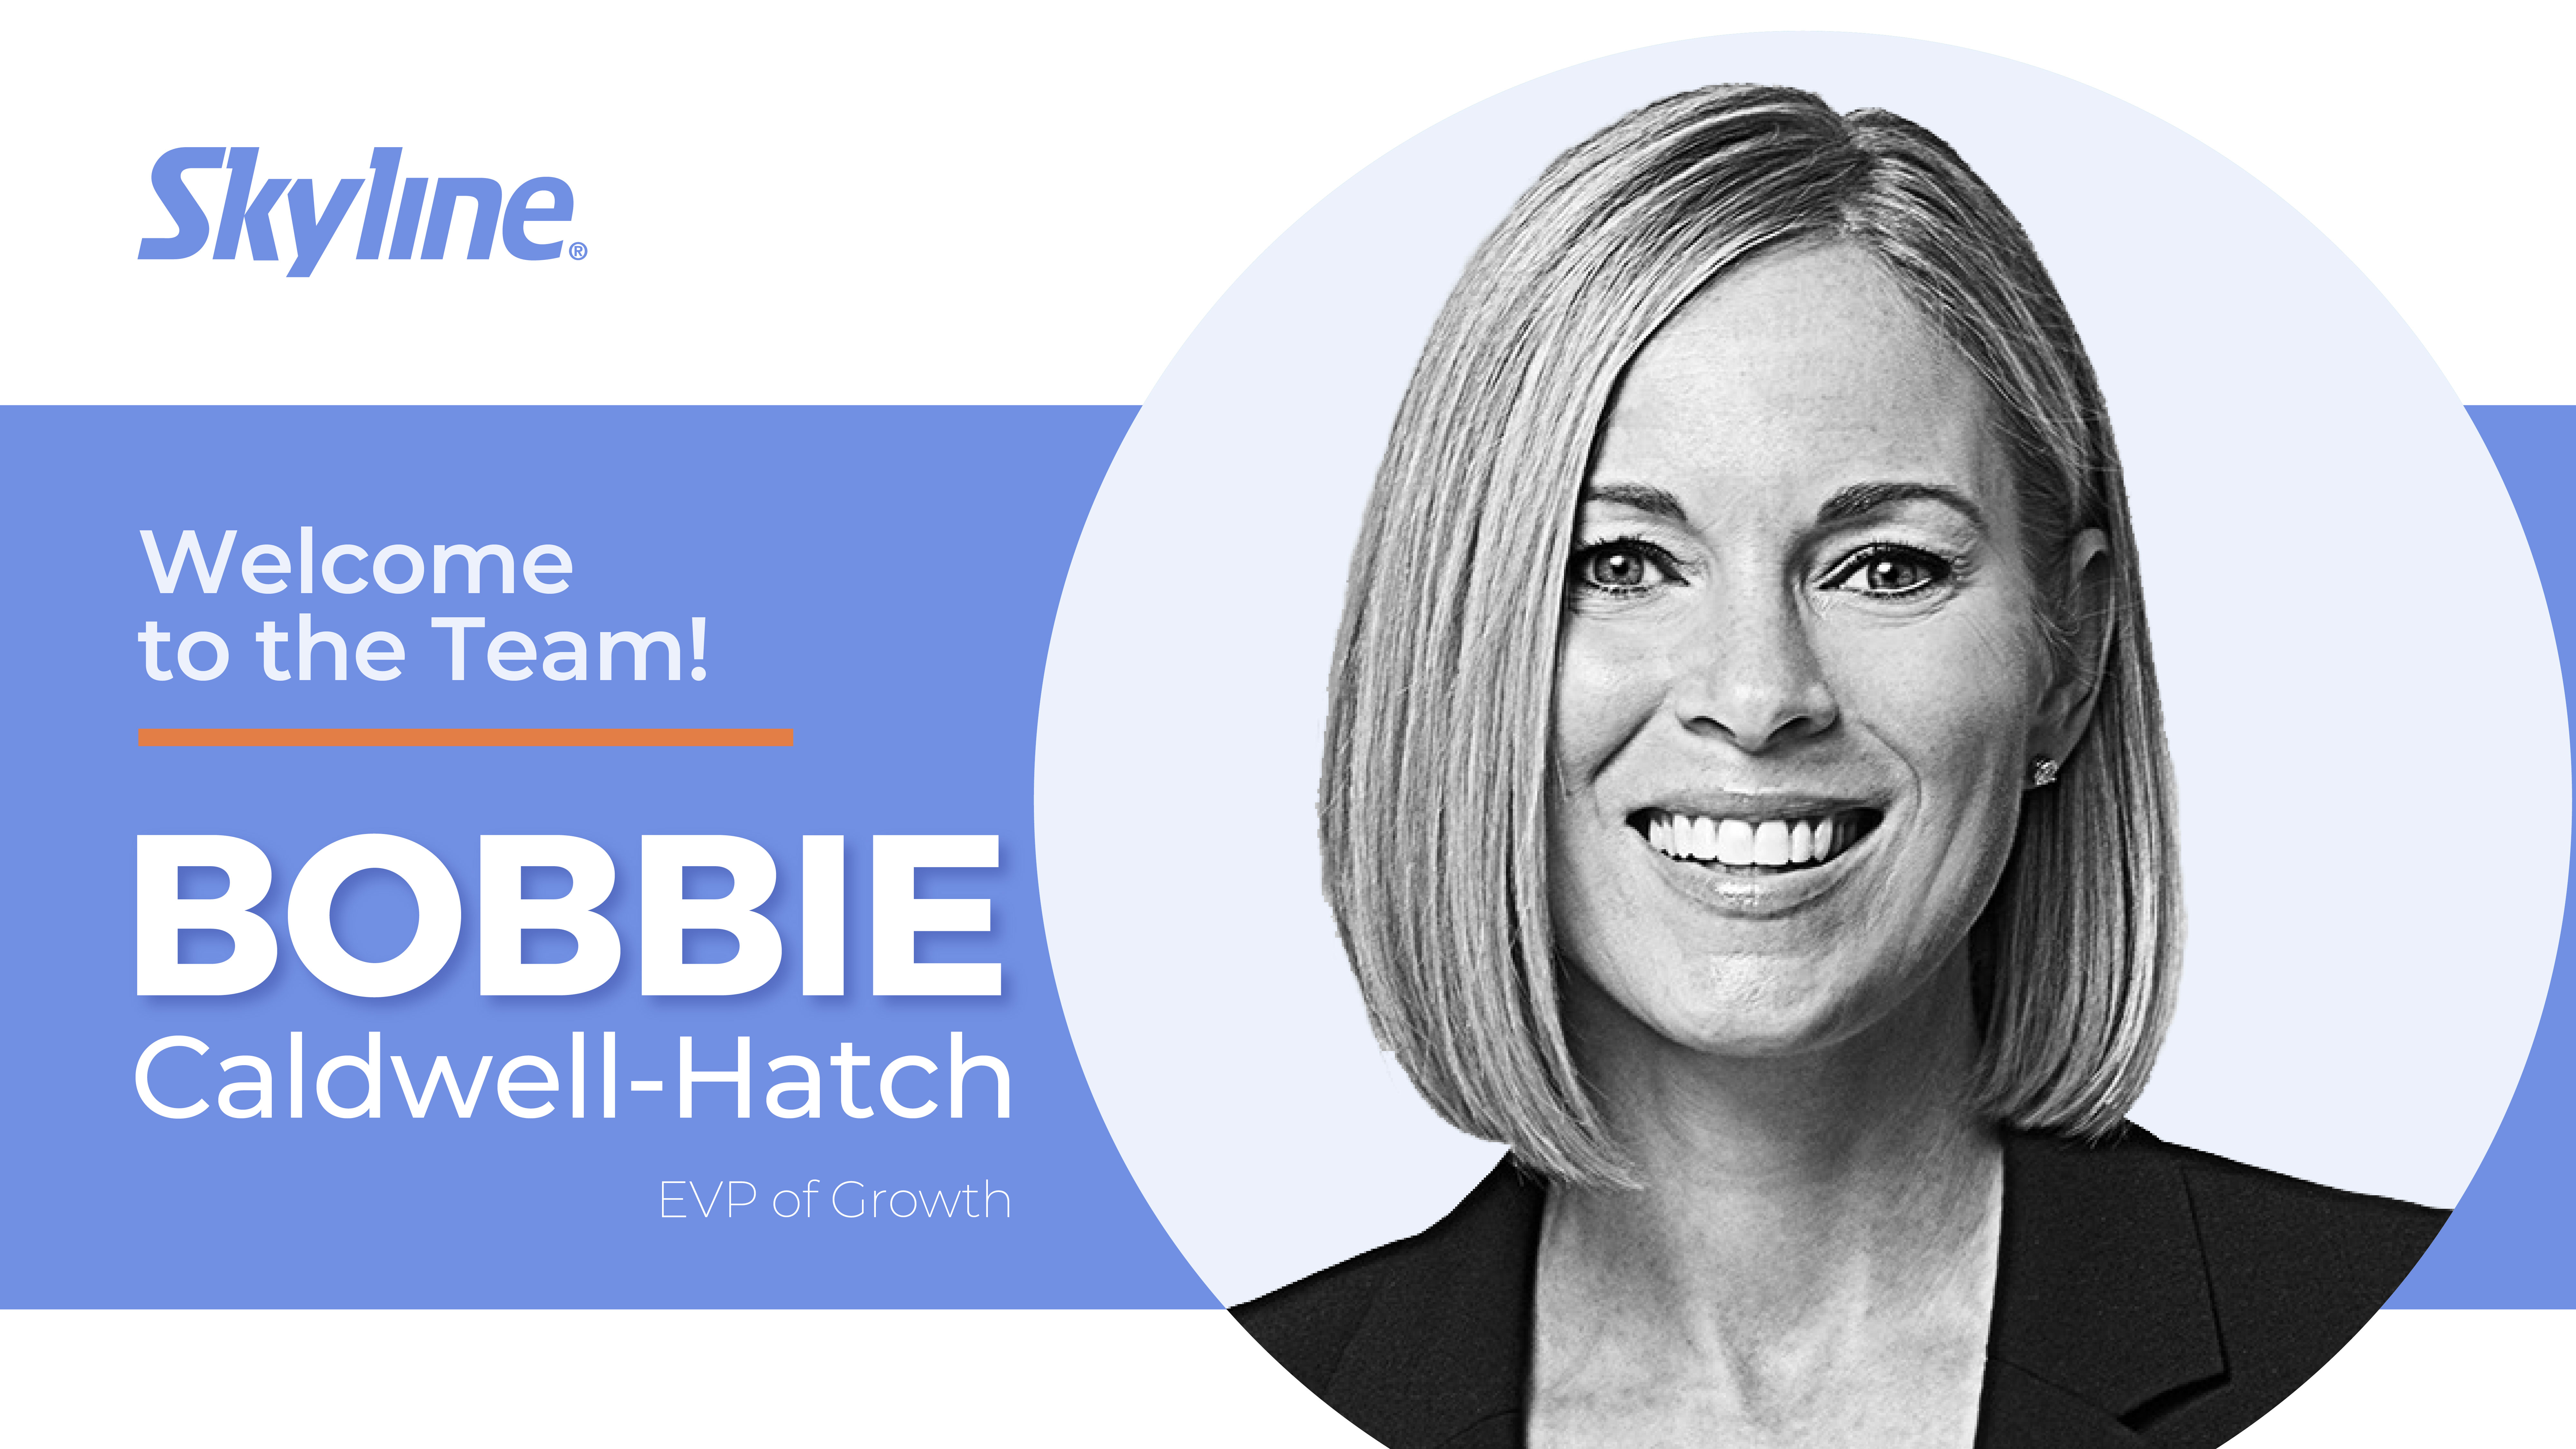 Welcome Bobbie Caldwell-Hatch, Executive Vice President of Growth